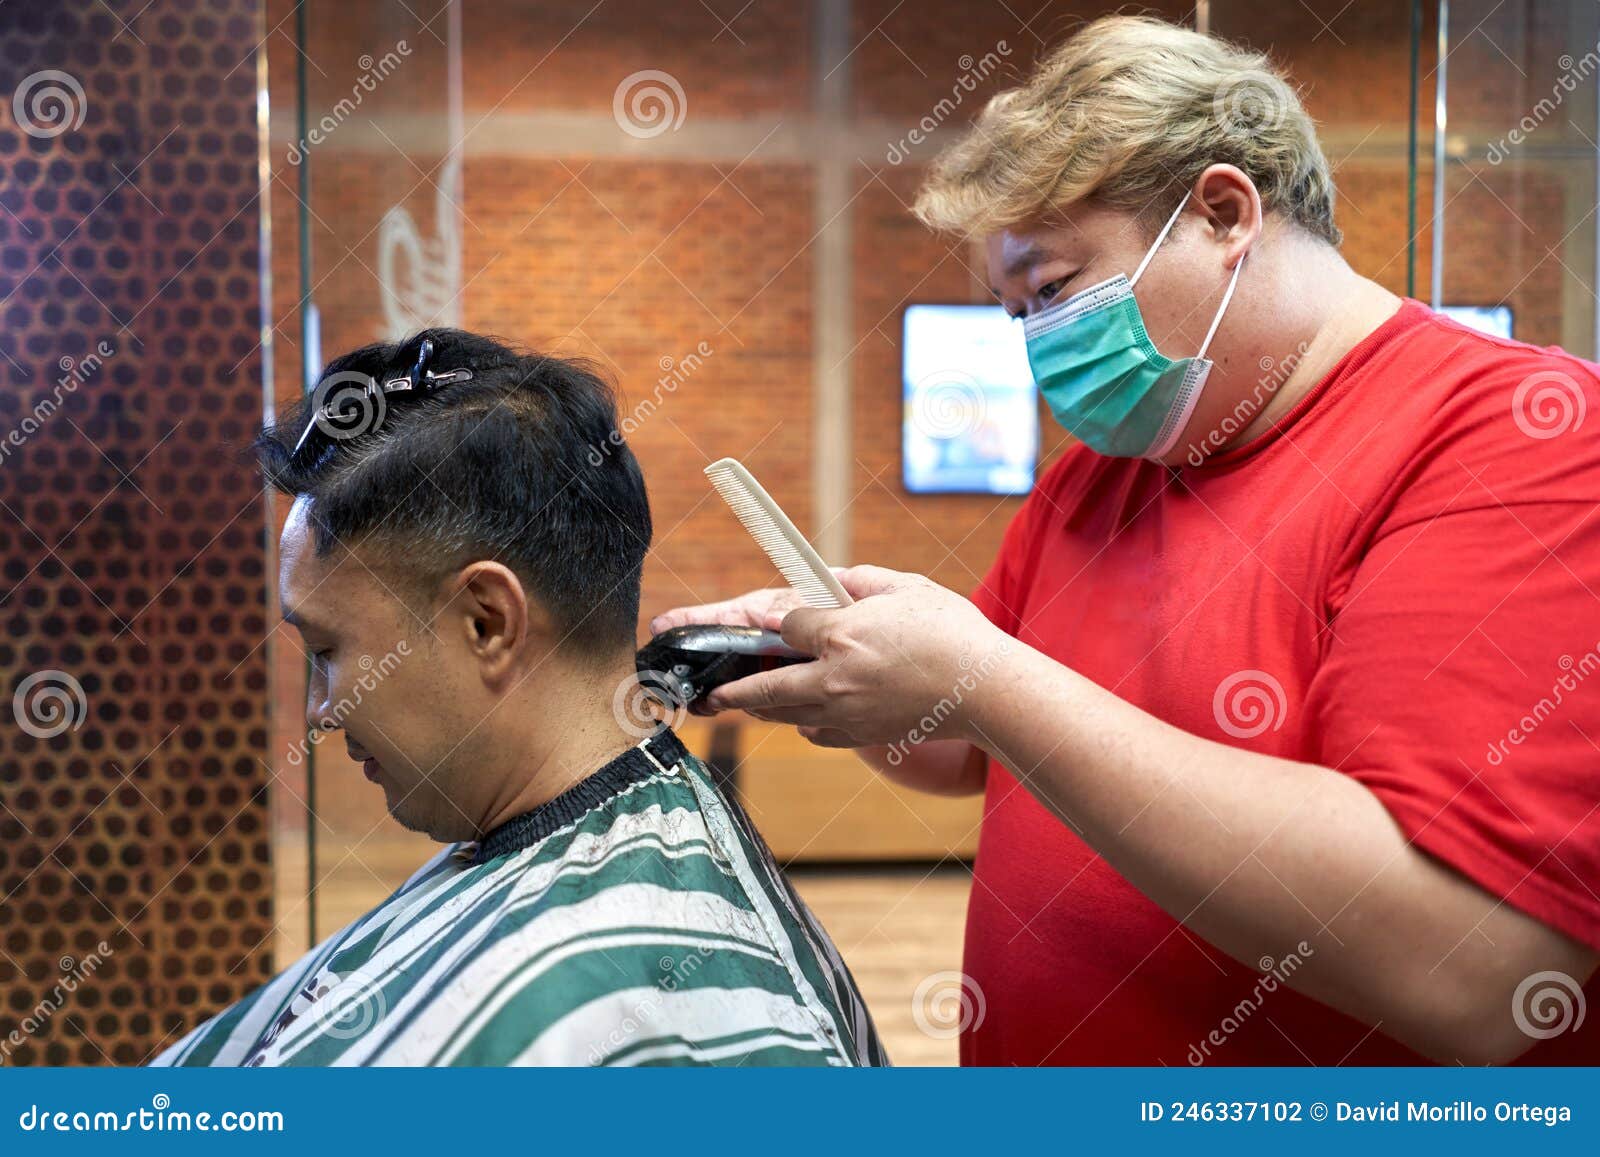 cheryl neubauer recommends asian barber shops near me pic